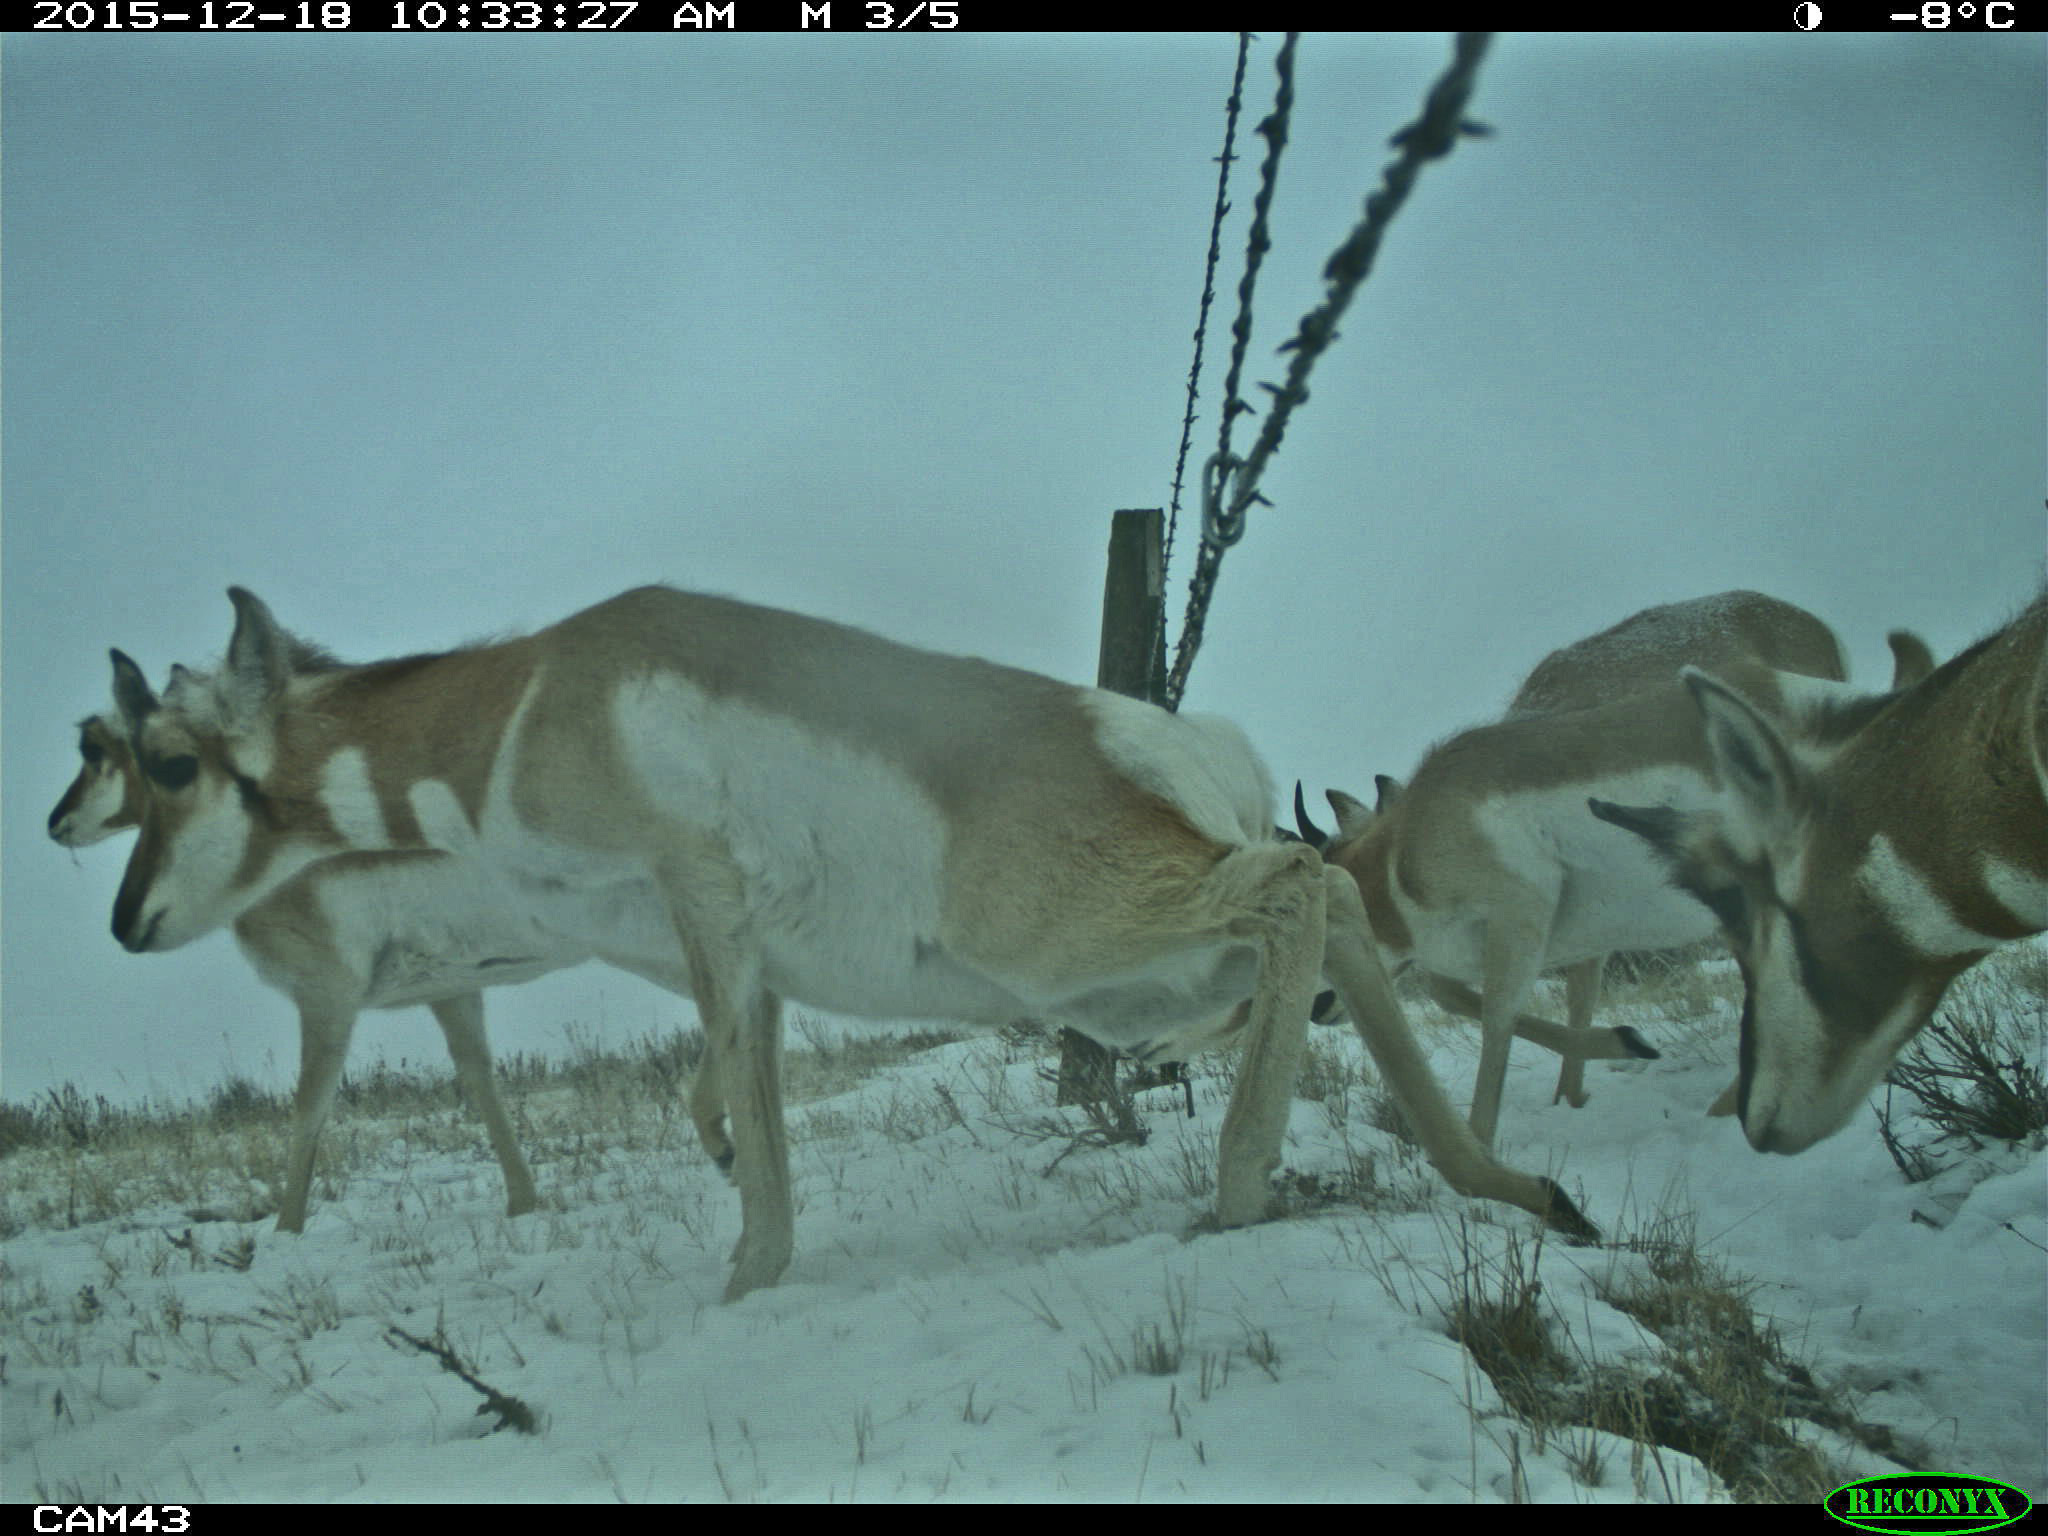 5 clips many How Can the Pronghorn Cross the Fence?